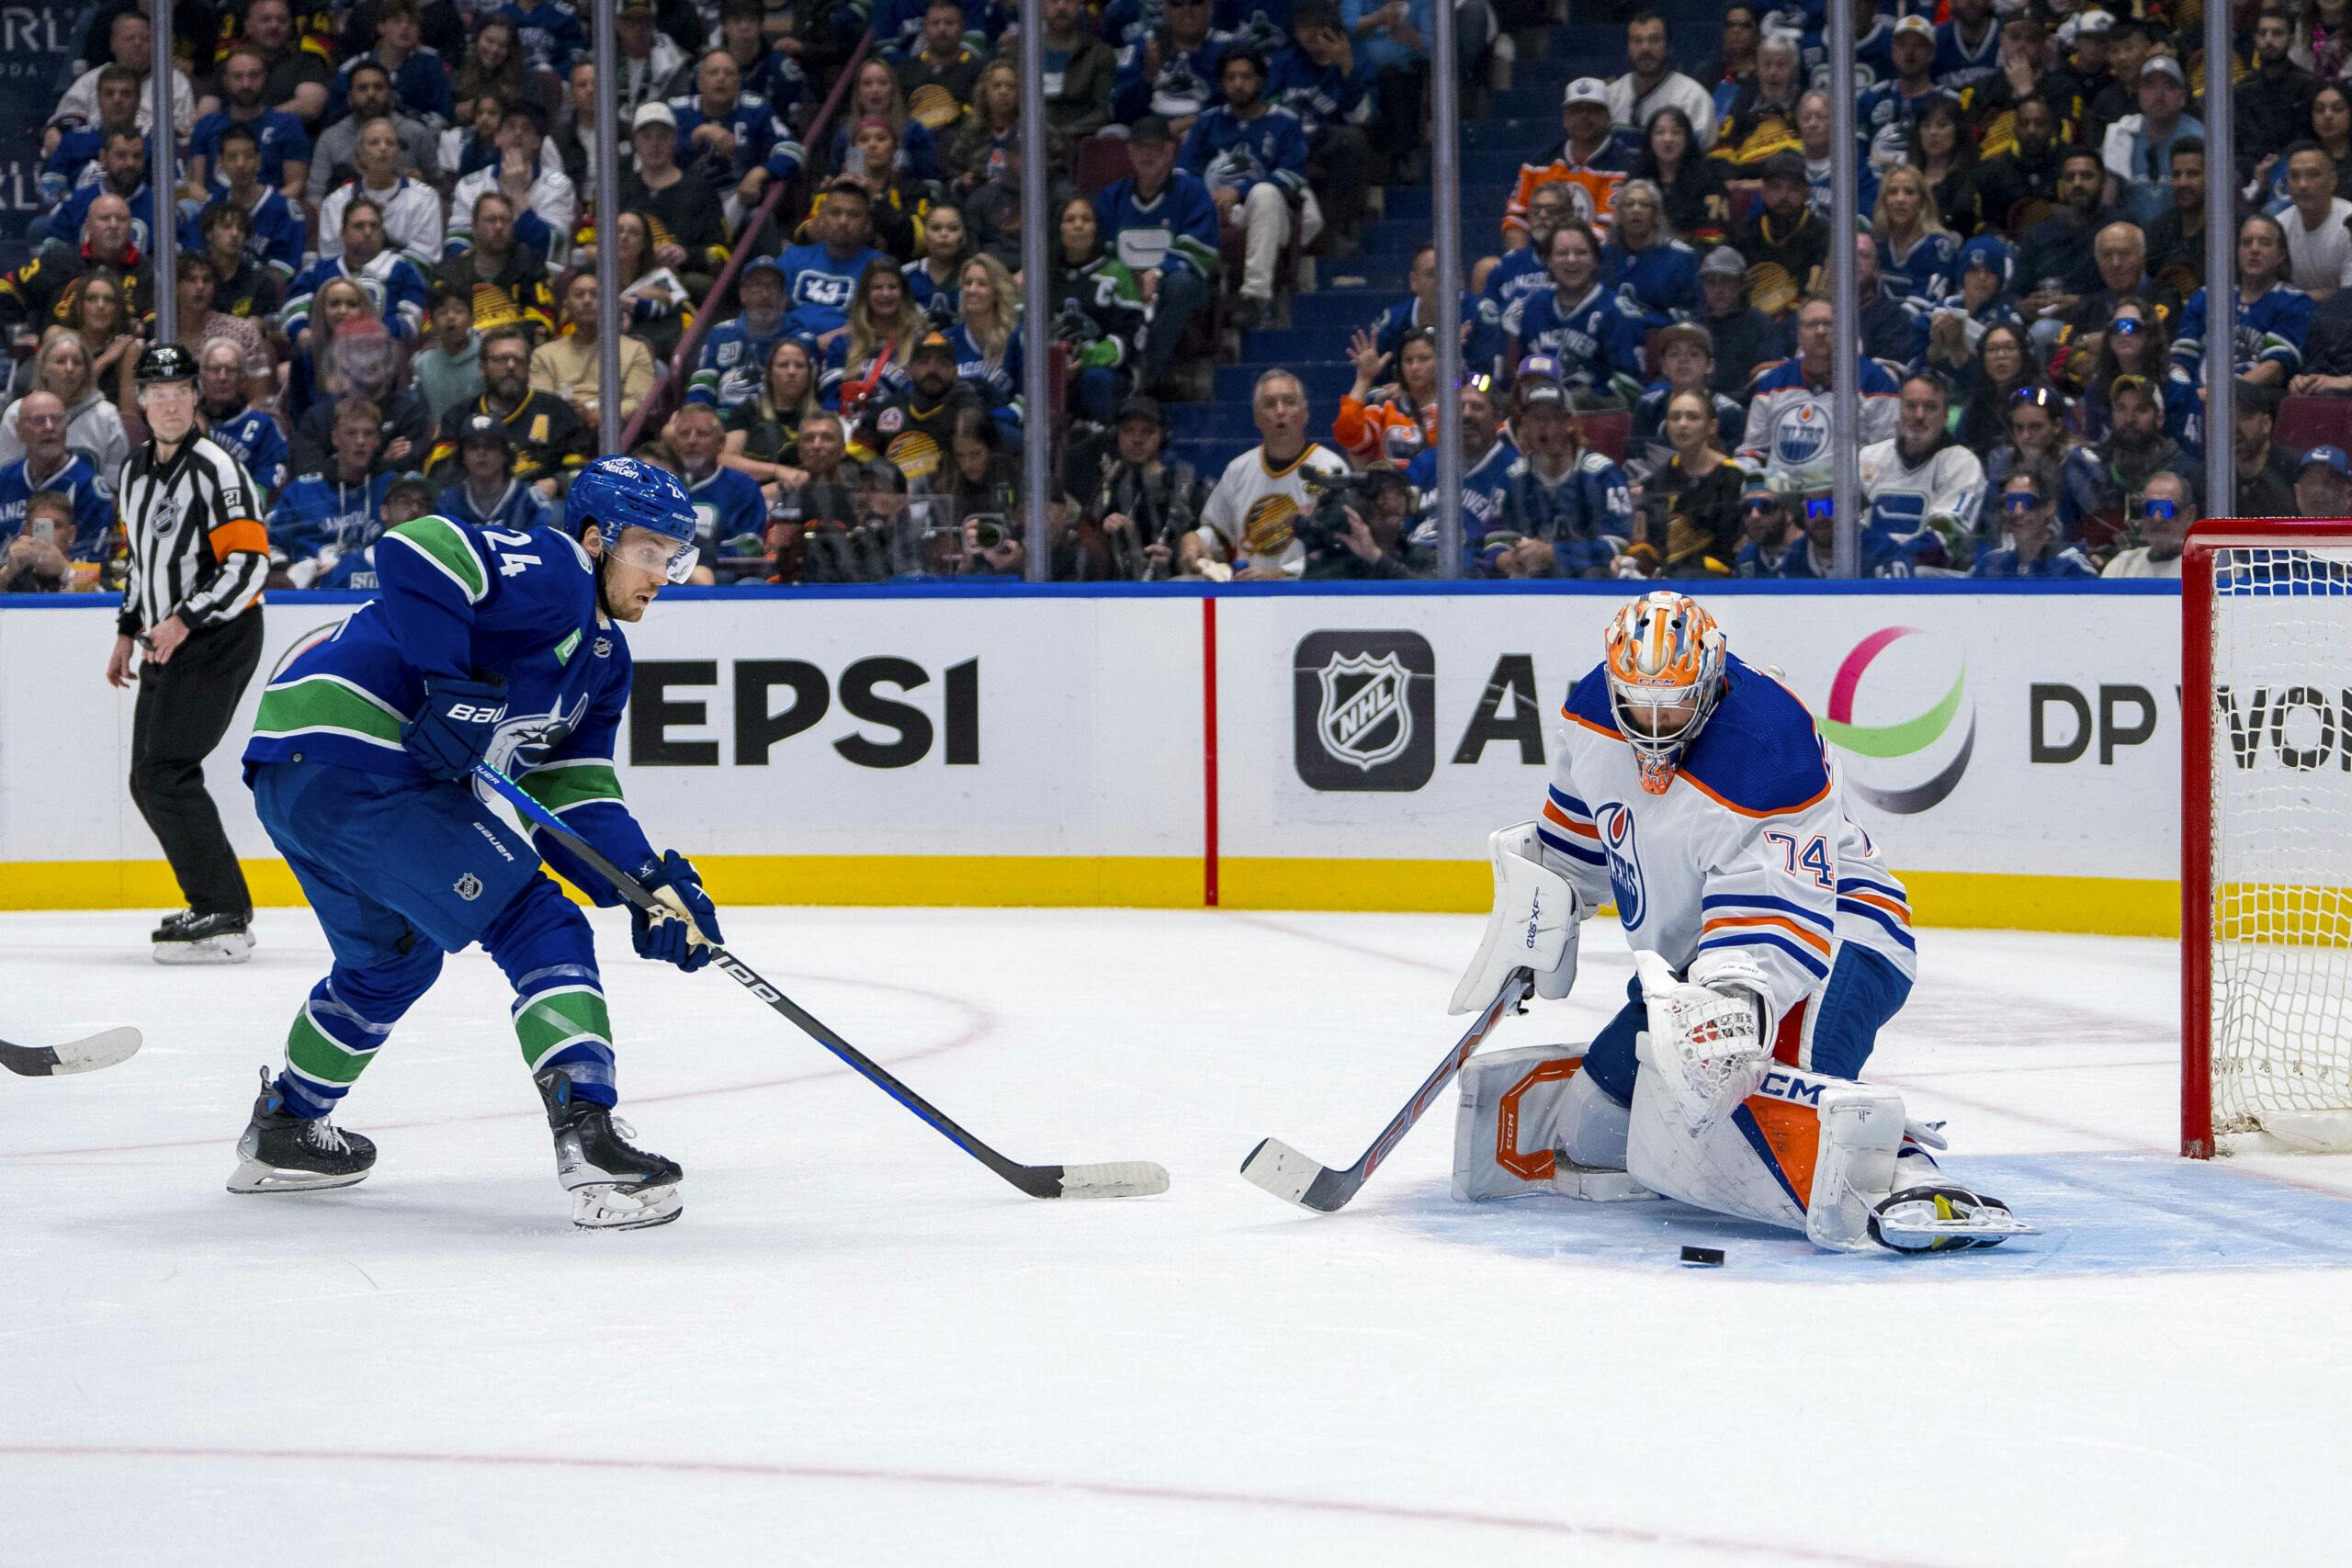 NHL betting preview for Game 3 of the Vancouver Canucks and Edmonton Oilers second round series